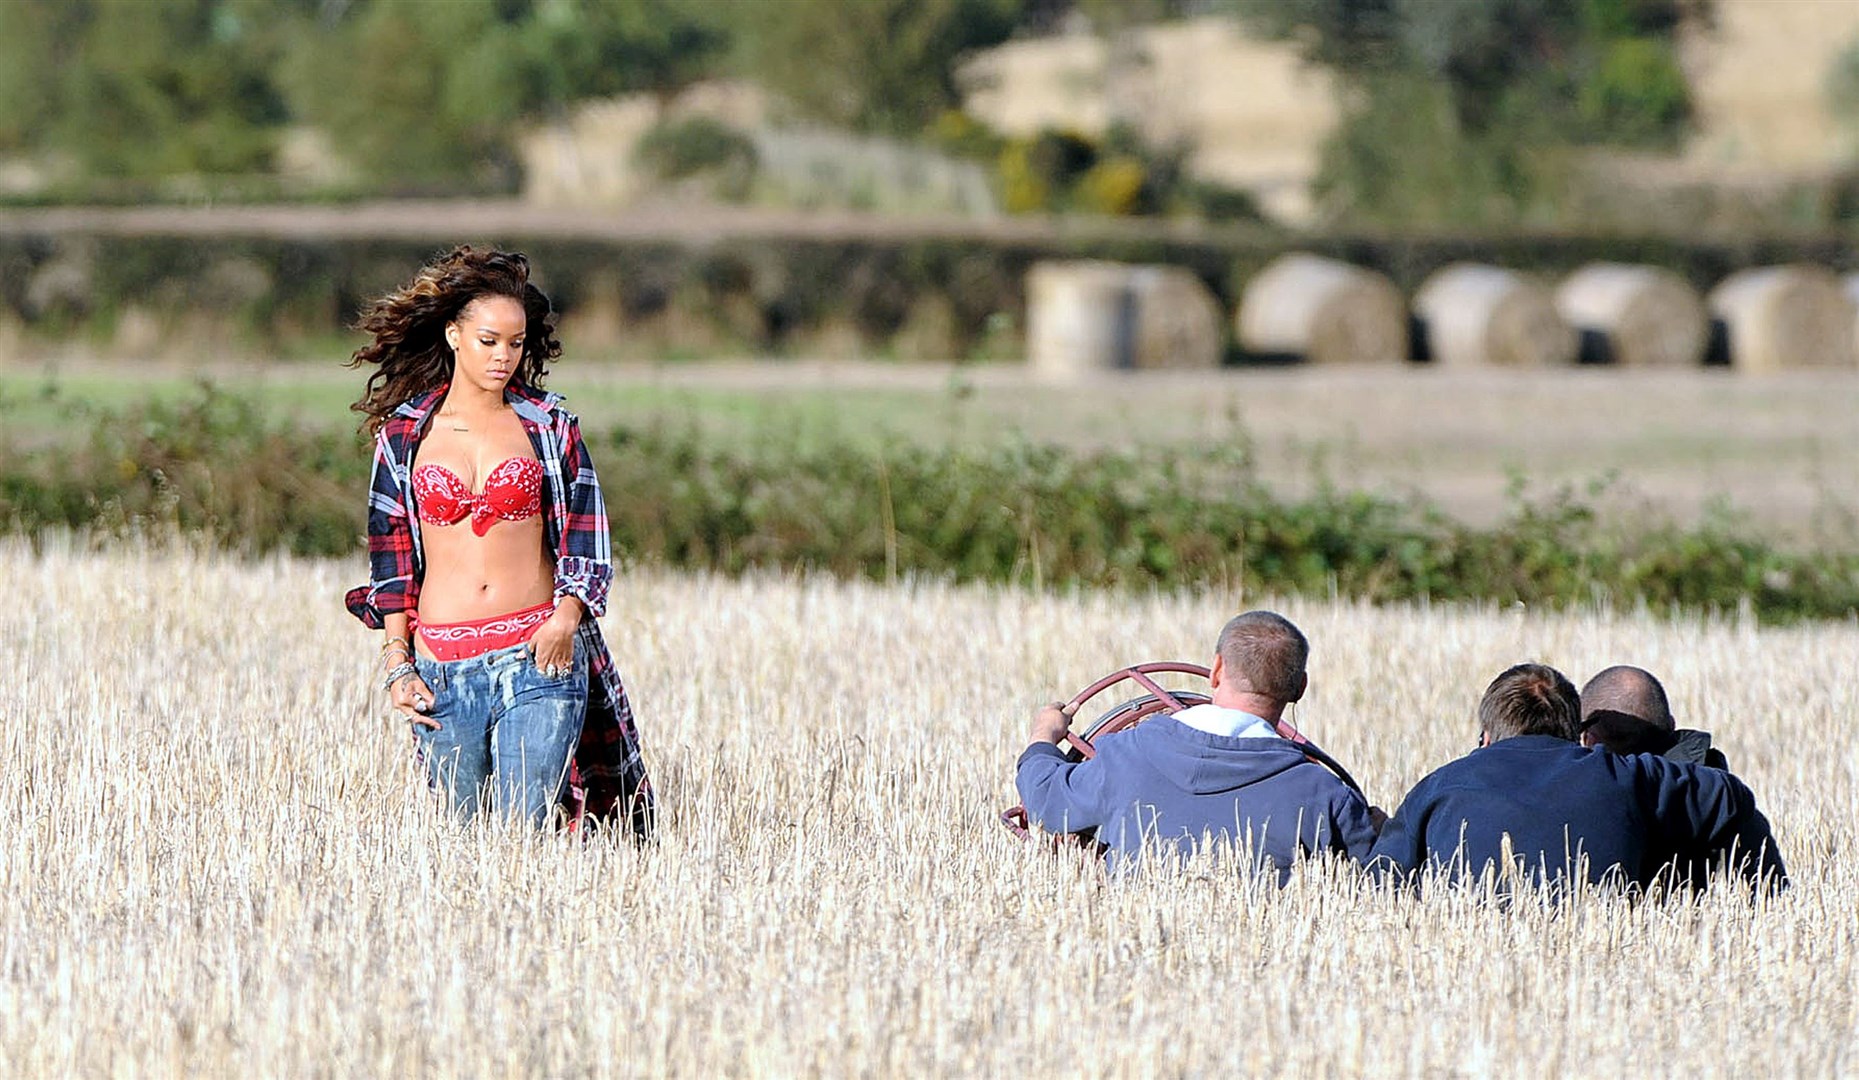 Rihanna during the first day of filming her new pop video in a field in County Down. (PA)